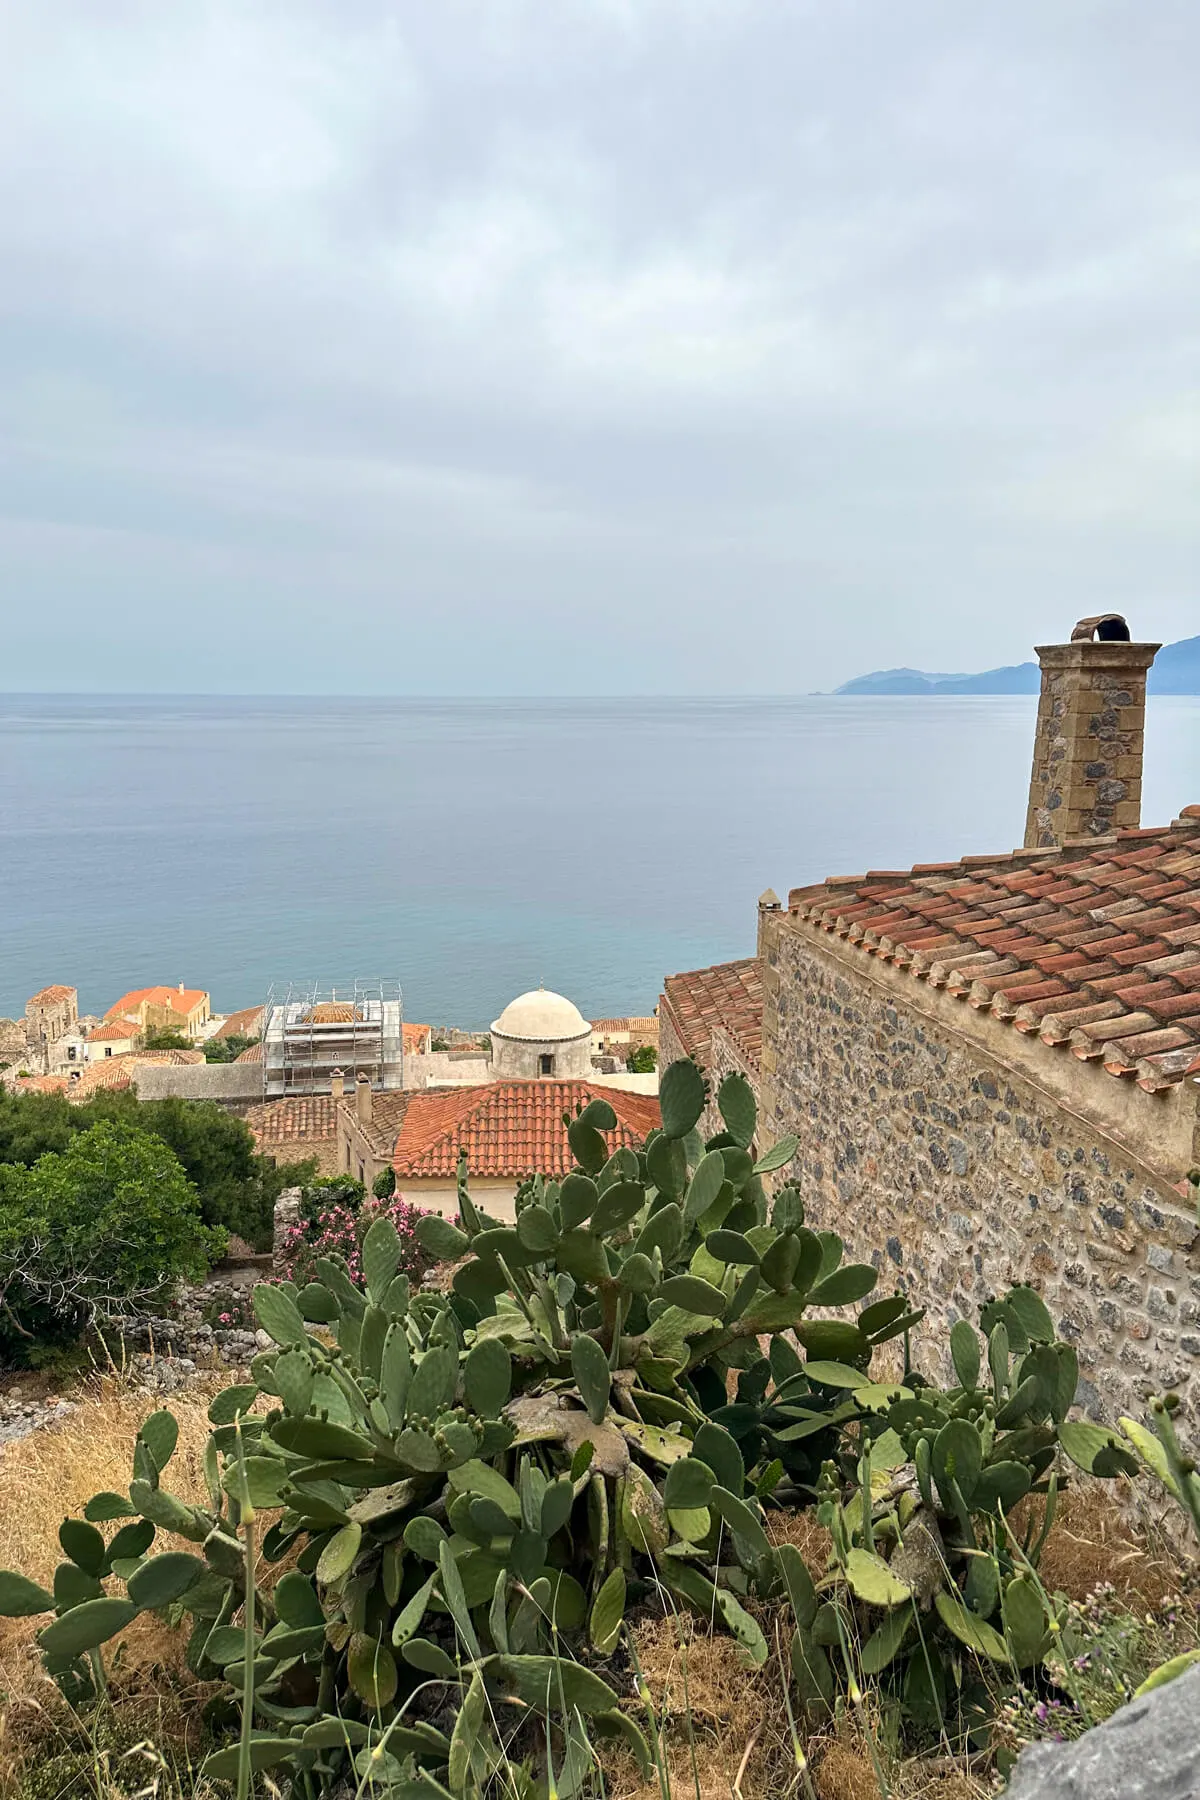 A view out over the sea as we walked up to the upper section of Monemvasia